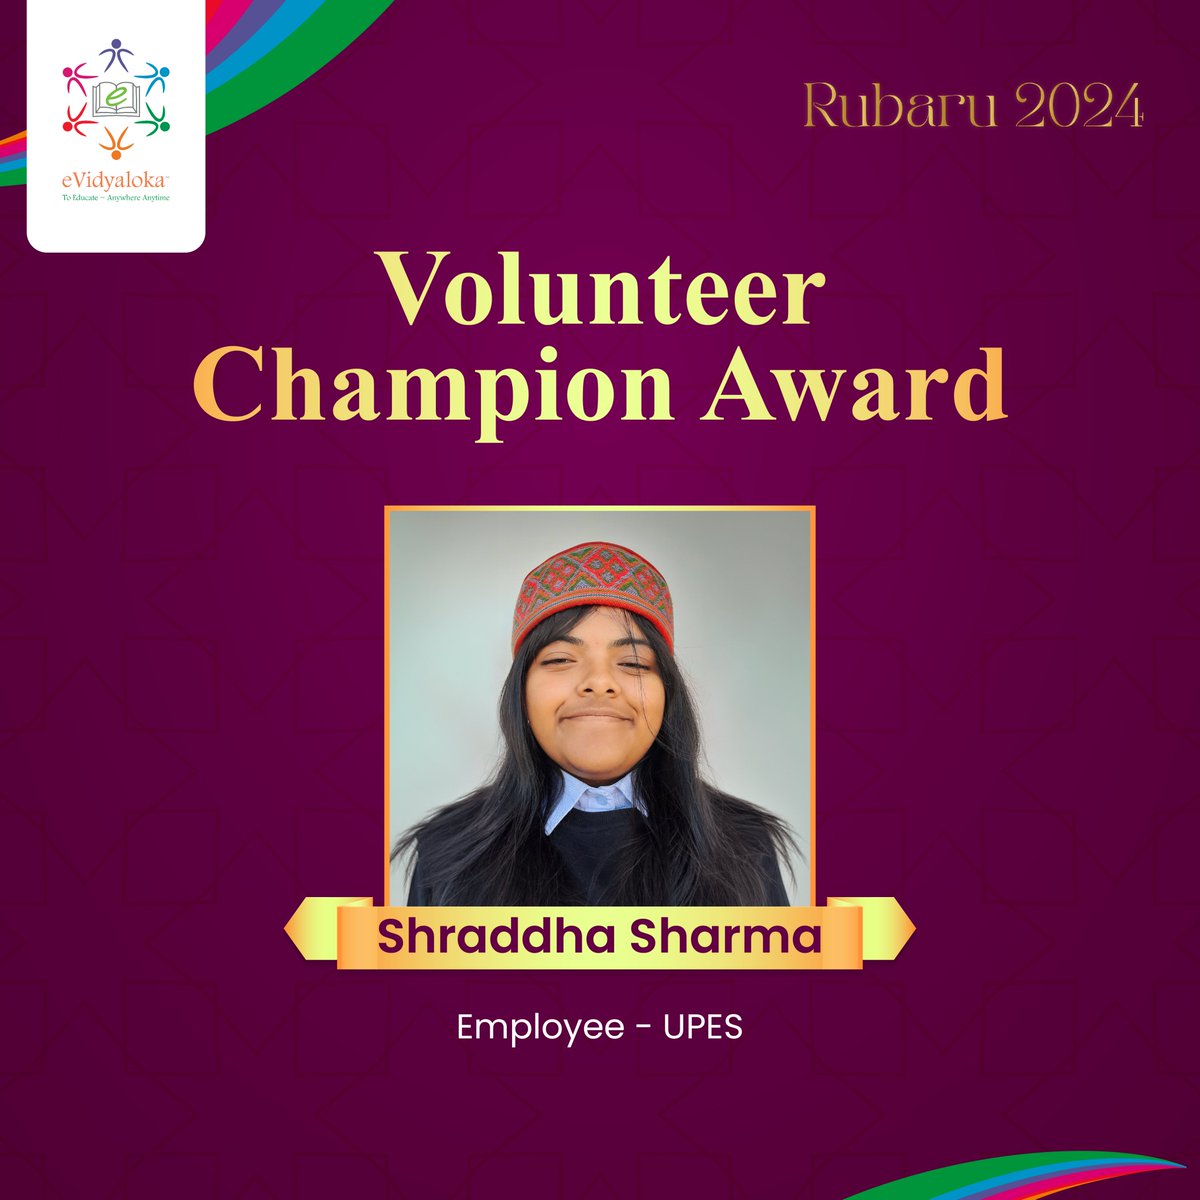 Reflecting on RUBARU 2024, we're inspired by the profound impact of eVidyaloka's volunteers, their unwavering dedication to empowering rural students shines brightly.
A sincere gratitude to Shraddha Sharma from UPES. 

#eVidyaloka #volunteer #educationforall